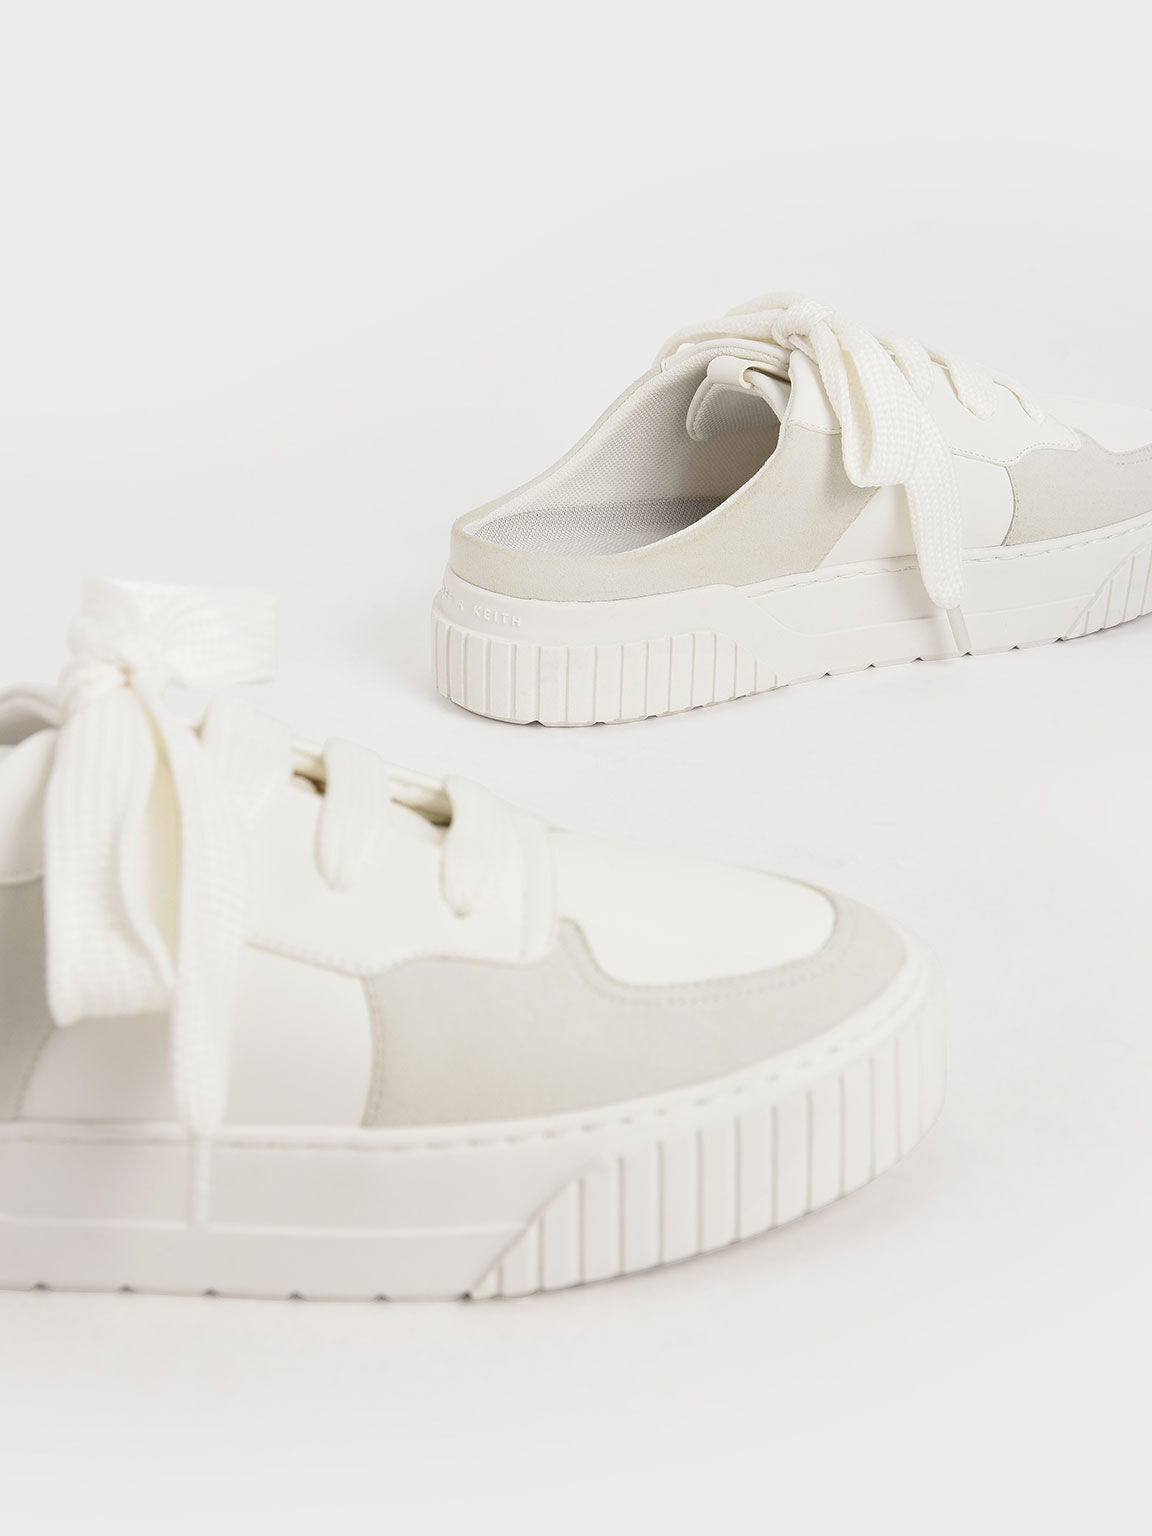 Microsuede Slip-On Trainers, White, hi-res